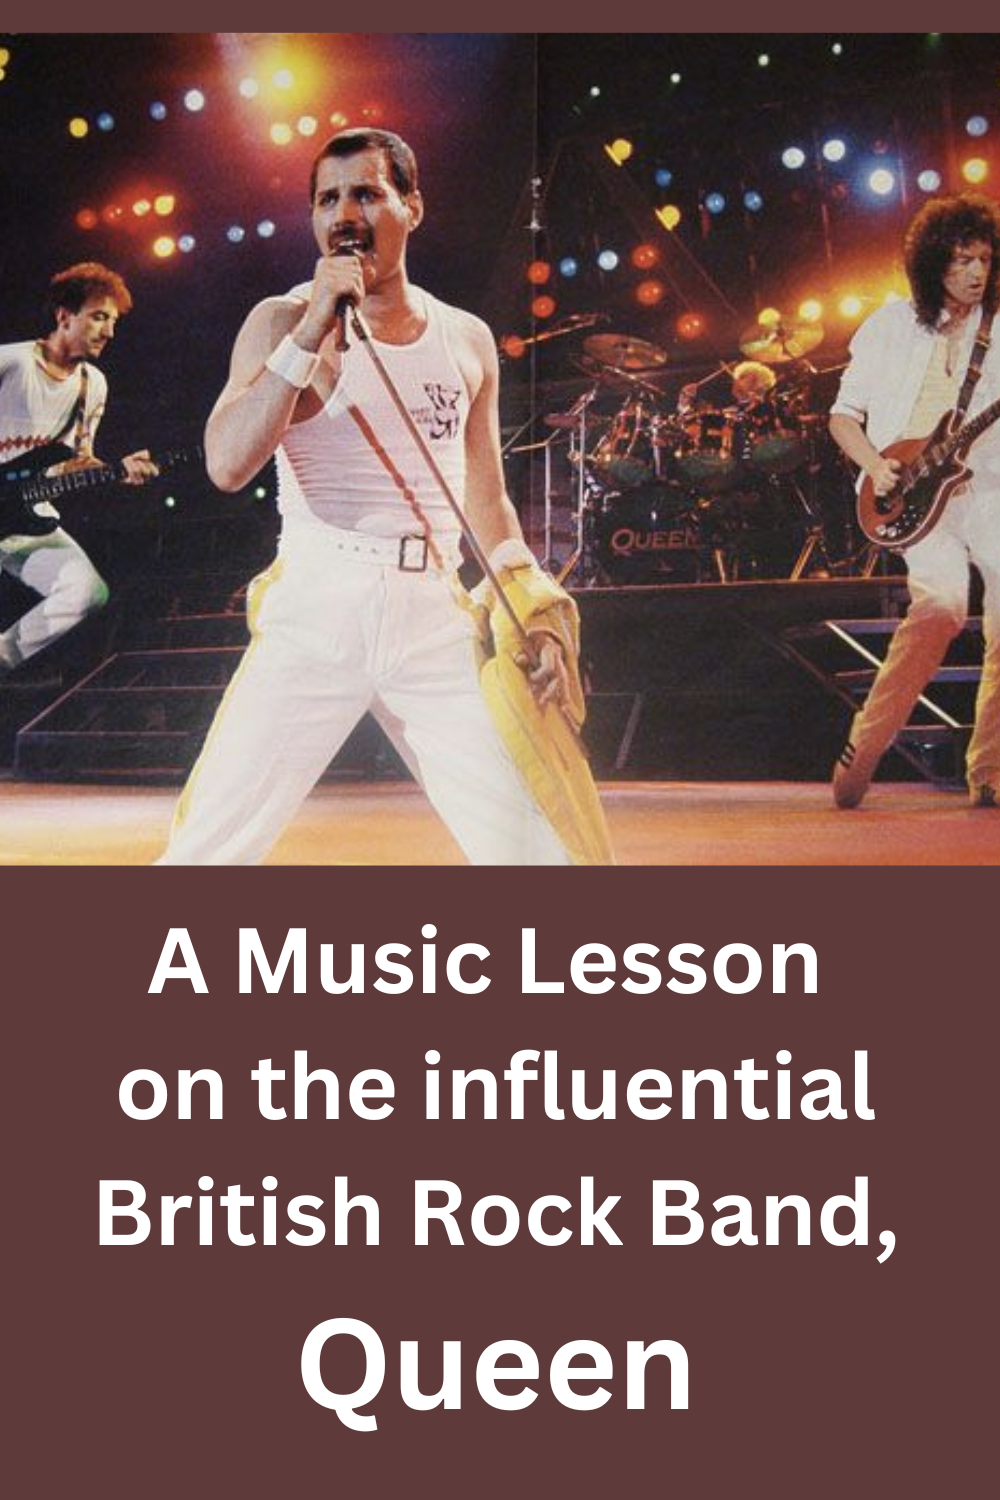 Pin on Music Lessons